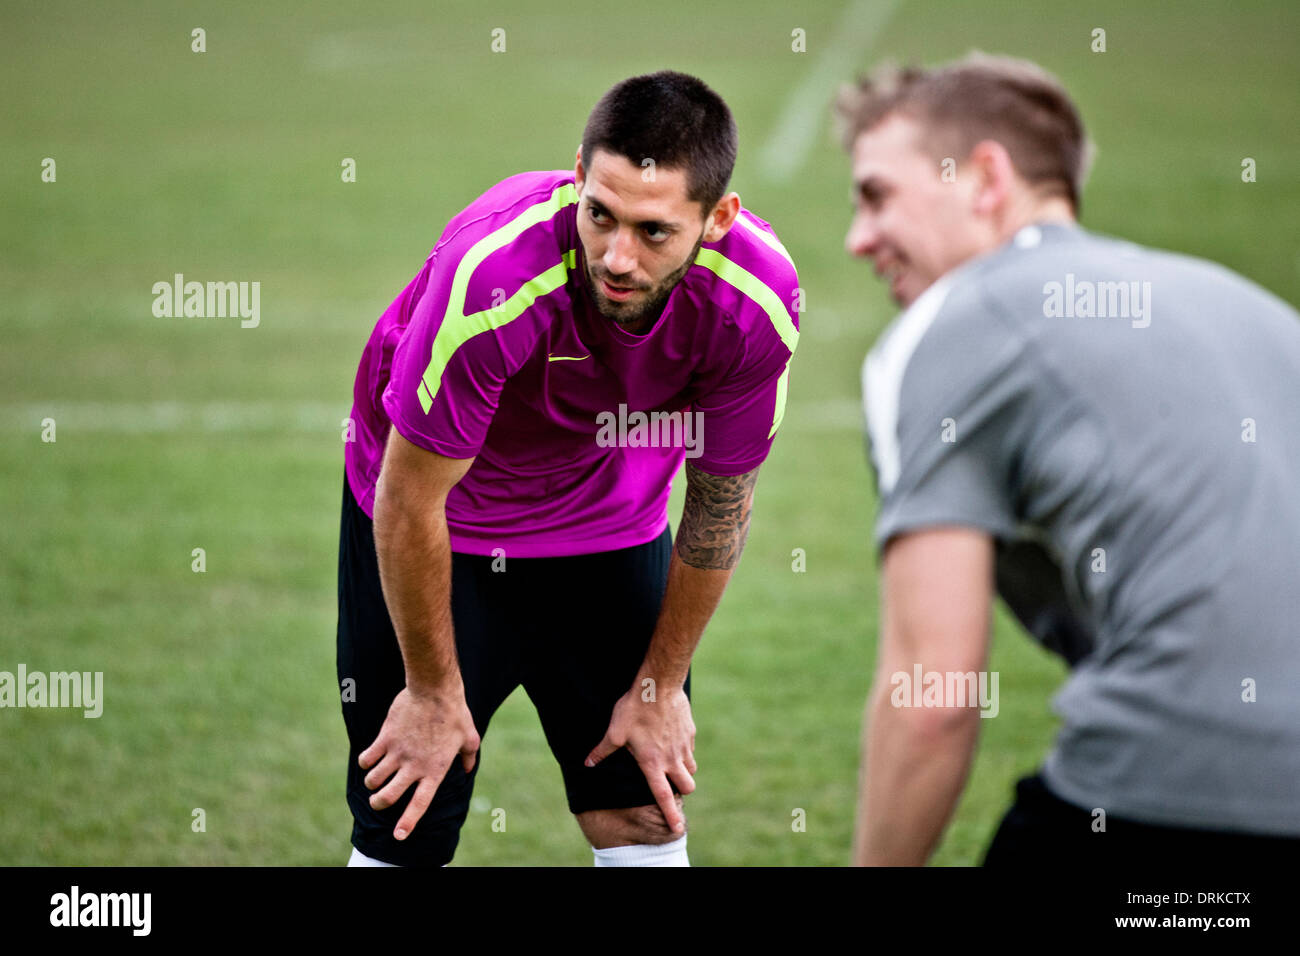 North American Soccer Star Clint Dempsey in London Stock Photo